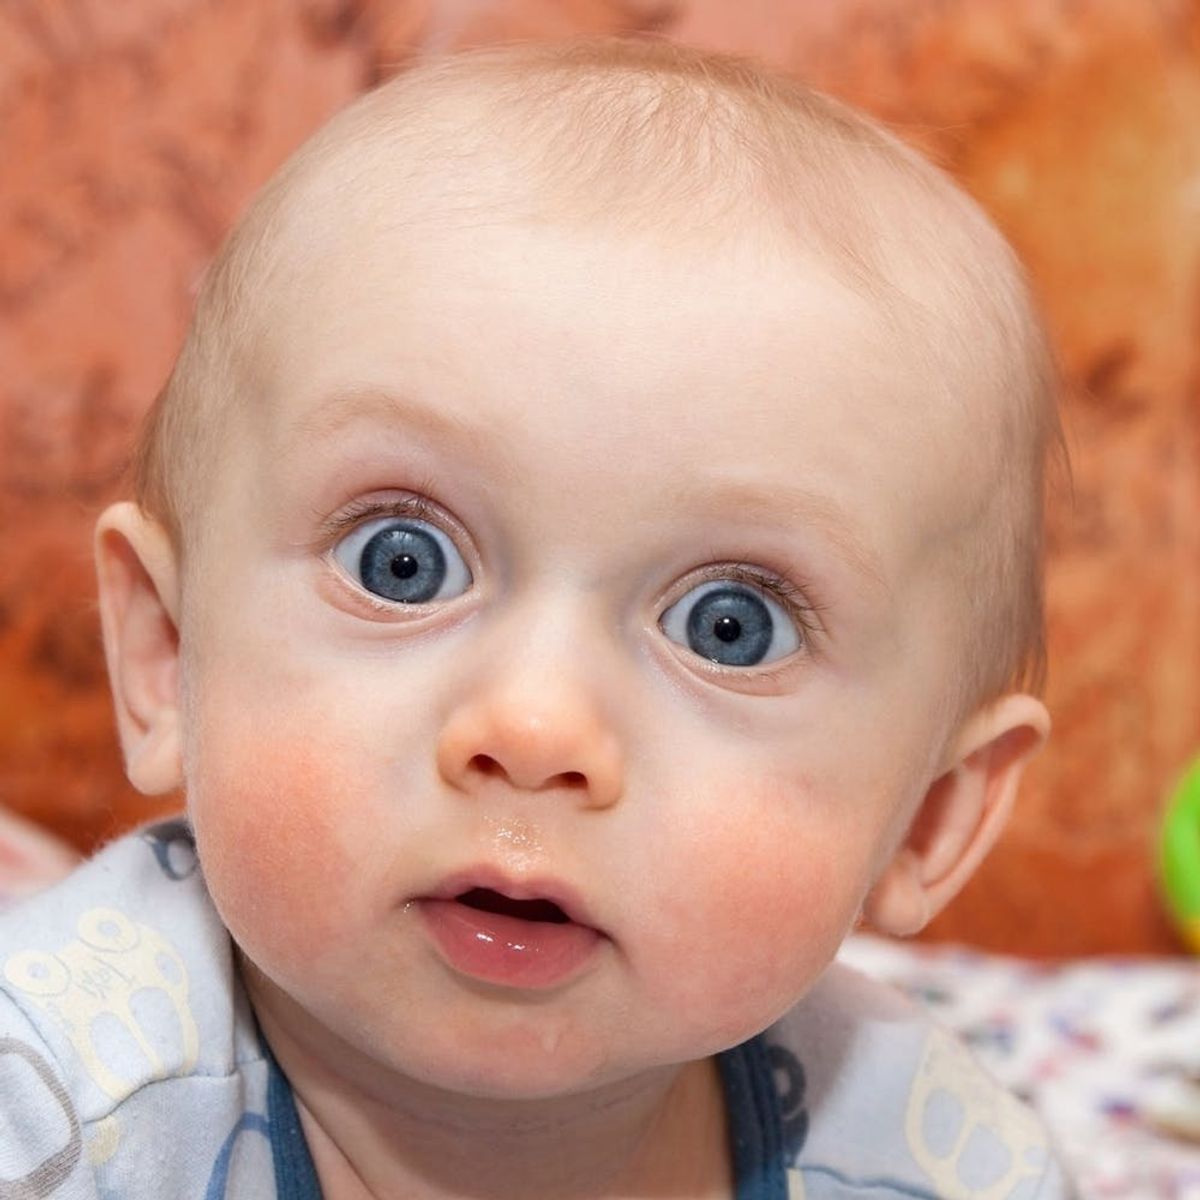 13 of the Craziest Baby Names of 2015